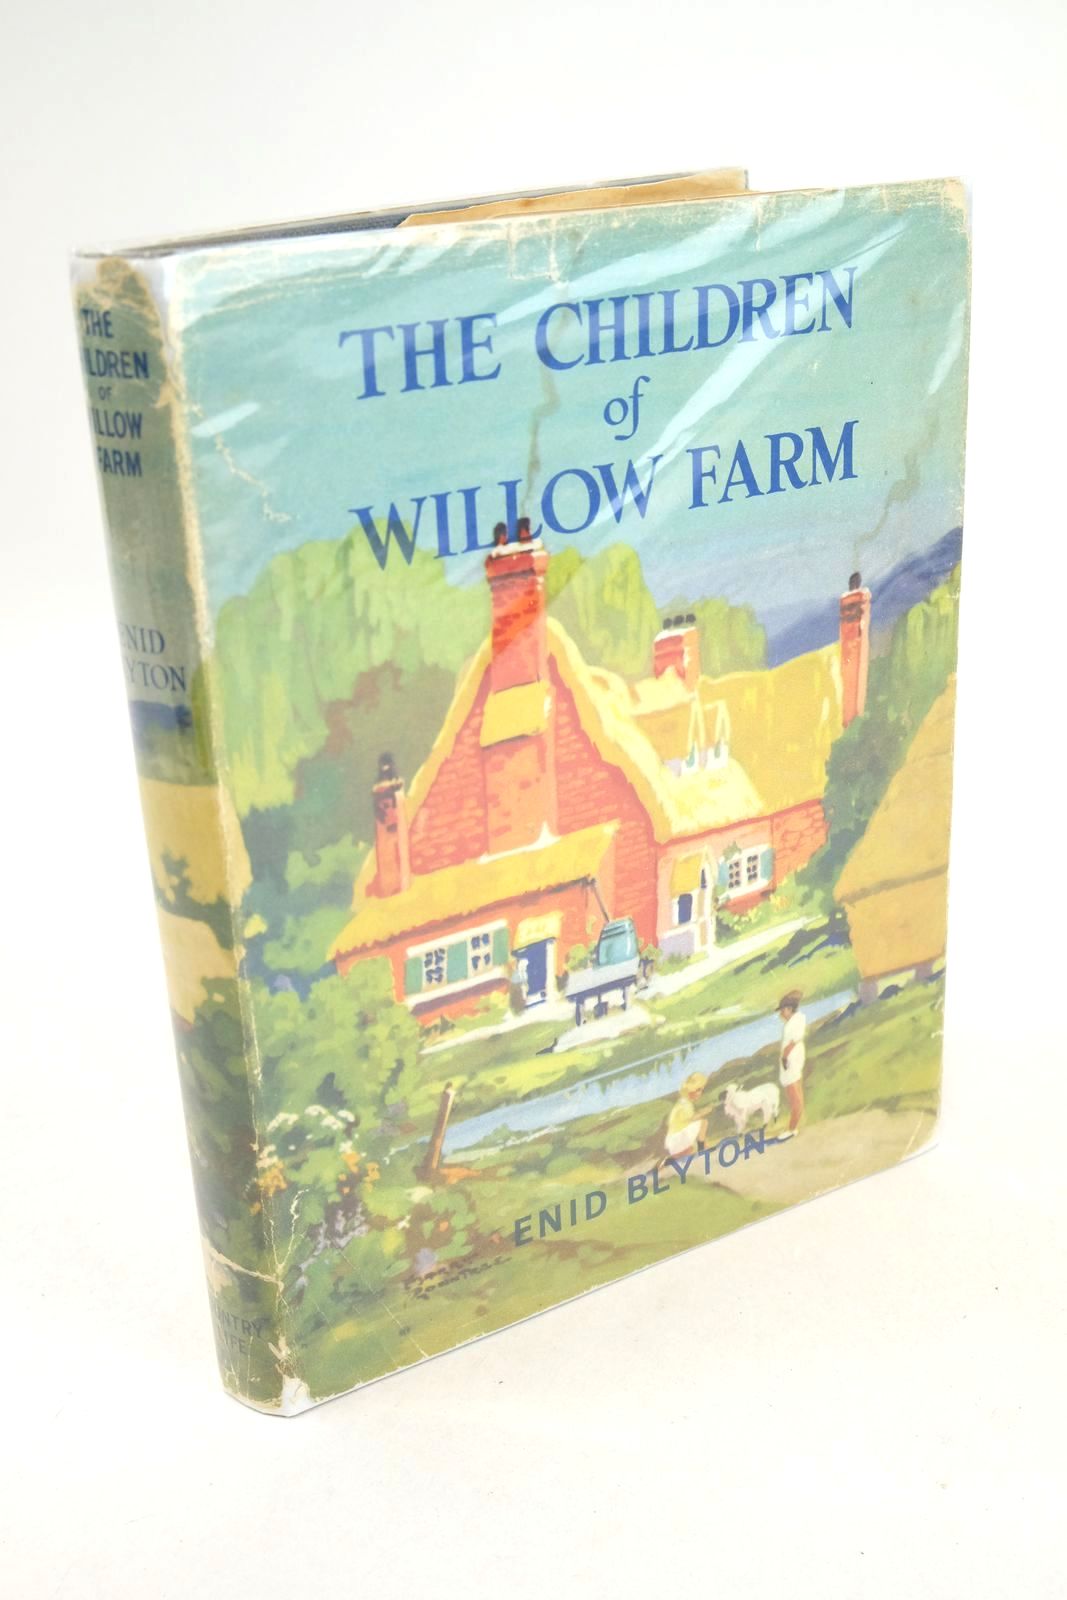 Photo of THE CHILDREN OF WILLOW FARM written by Blyton, Enid illustrated by Rountree, Harry published by Country Life Ltd. (STOCK CODE: 1325787)  for sale by Stella & Rose's Books